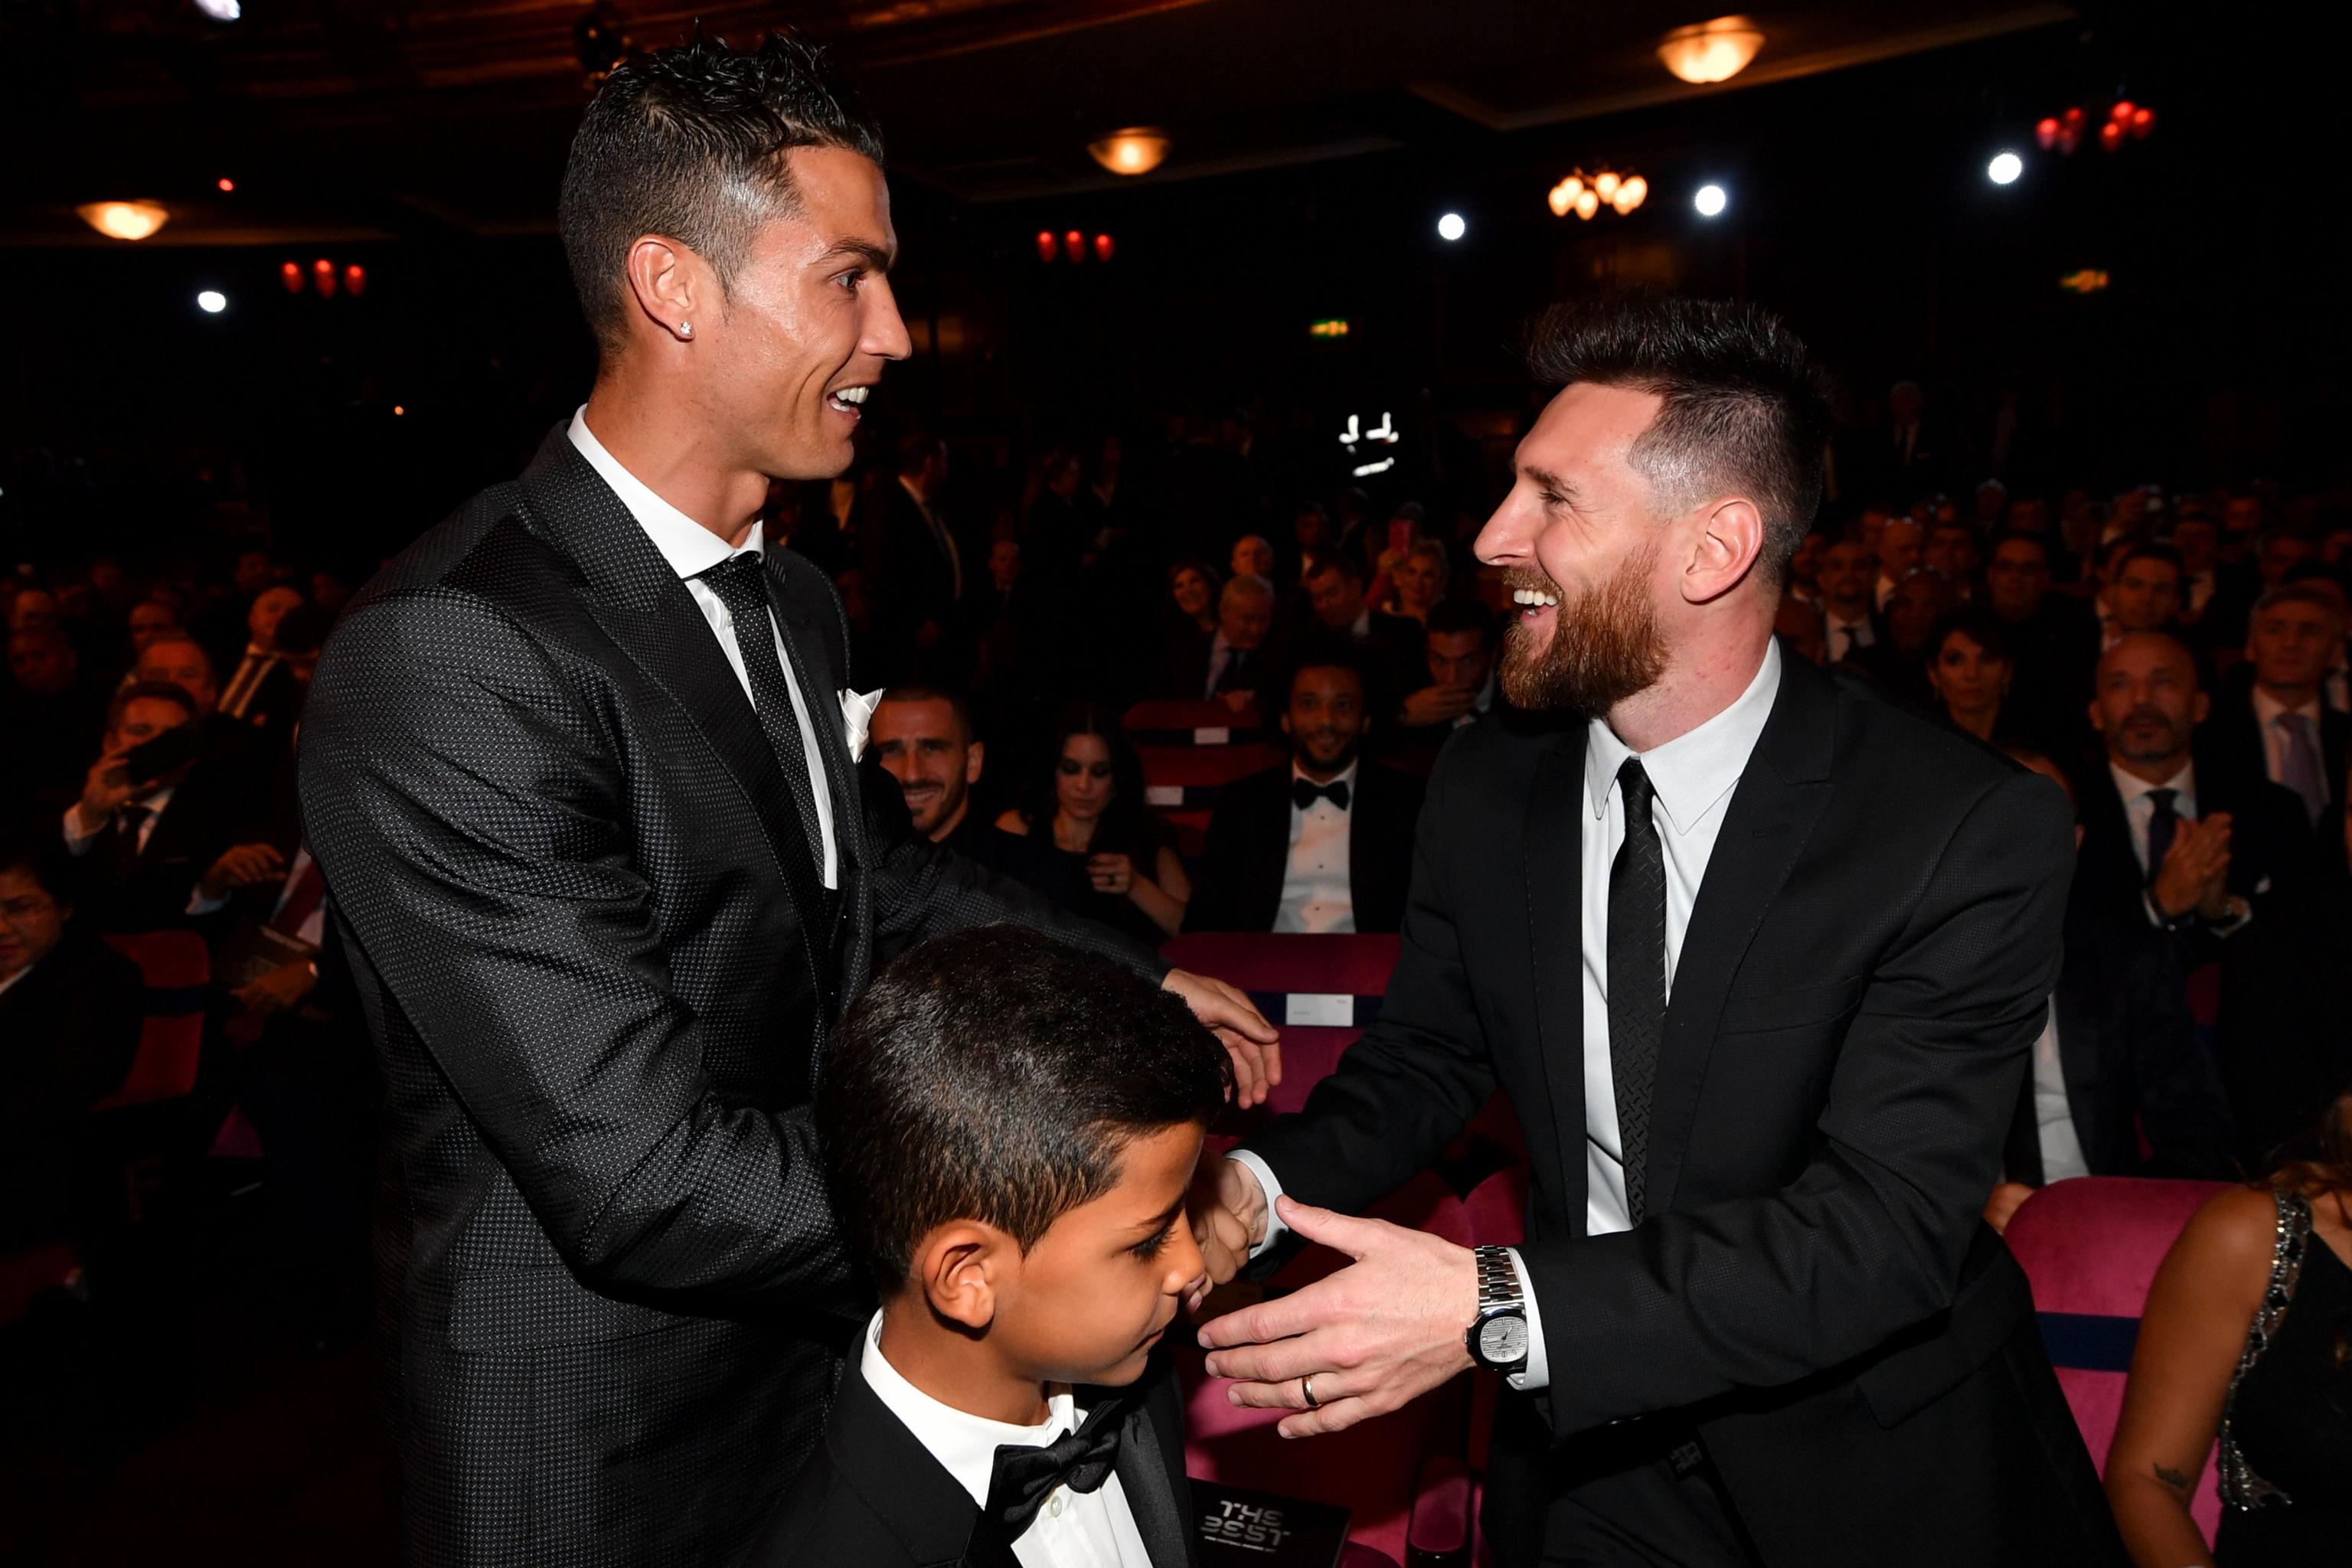 Lionel Messi Unsure If He and Cristiano Ronaldo Could Be Good